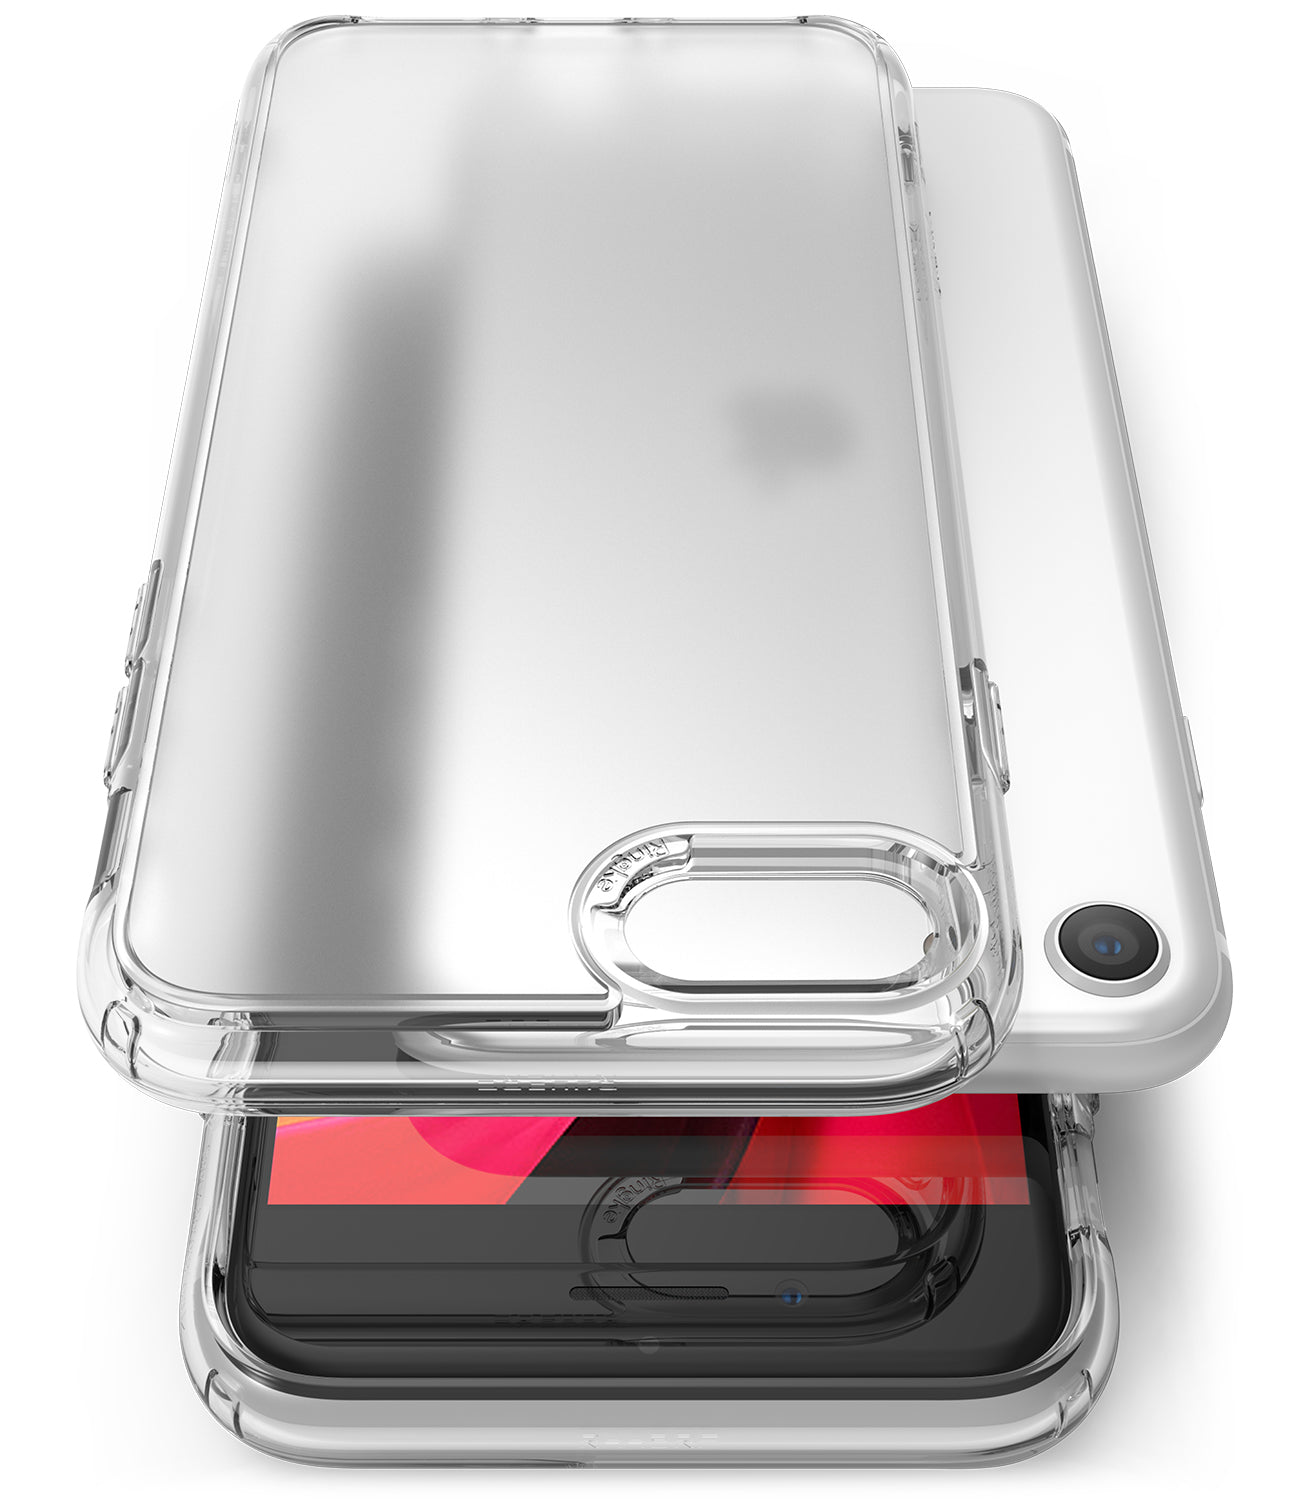 ringke fusion no smudge mattte clear case for apple iphone se 2020 / iphone 8